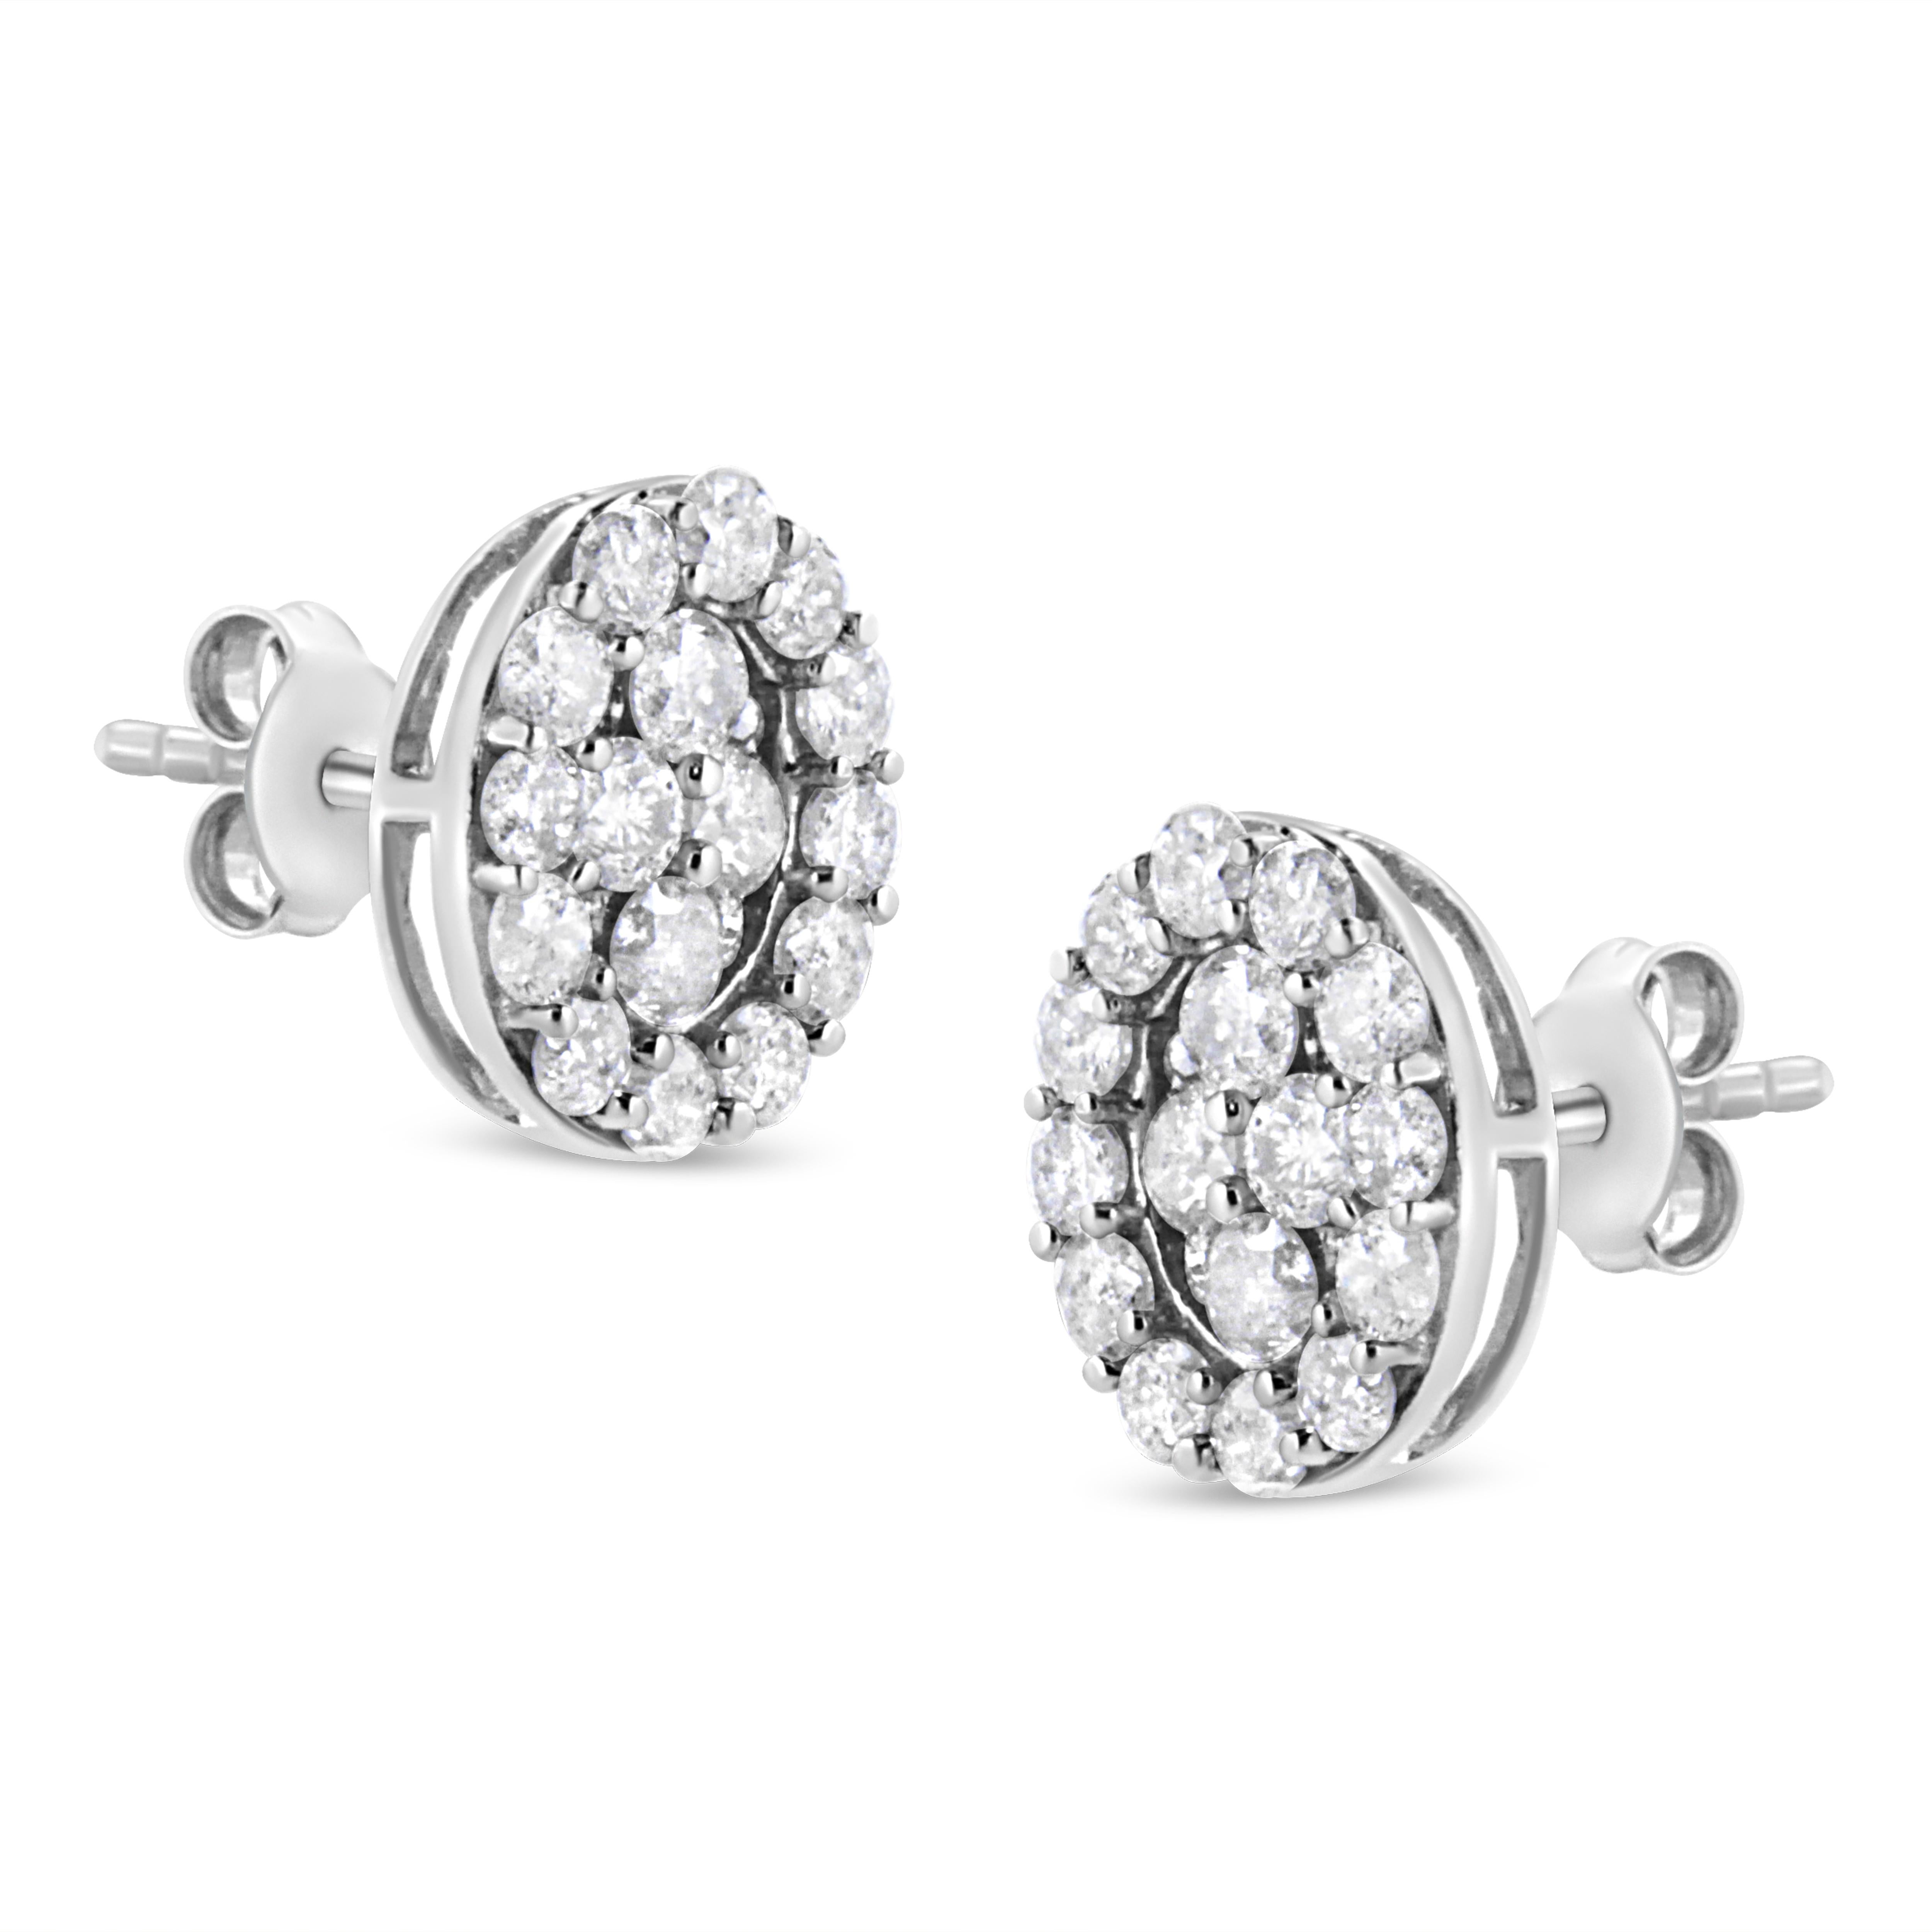 Contemporary .925 Sterling Silver 1 1/2 Carat Round-Cut Diamond Oval Shaped Stud Earrings For Sale